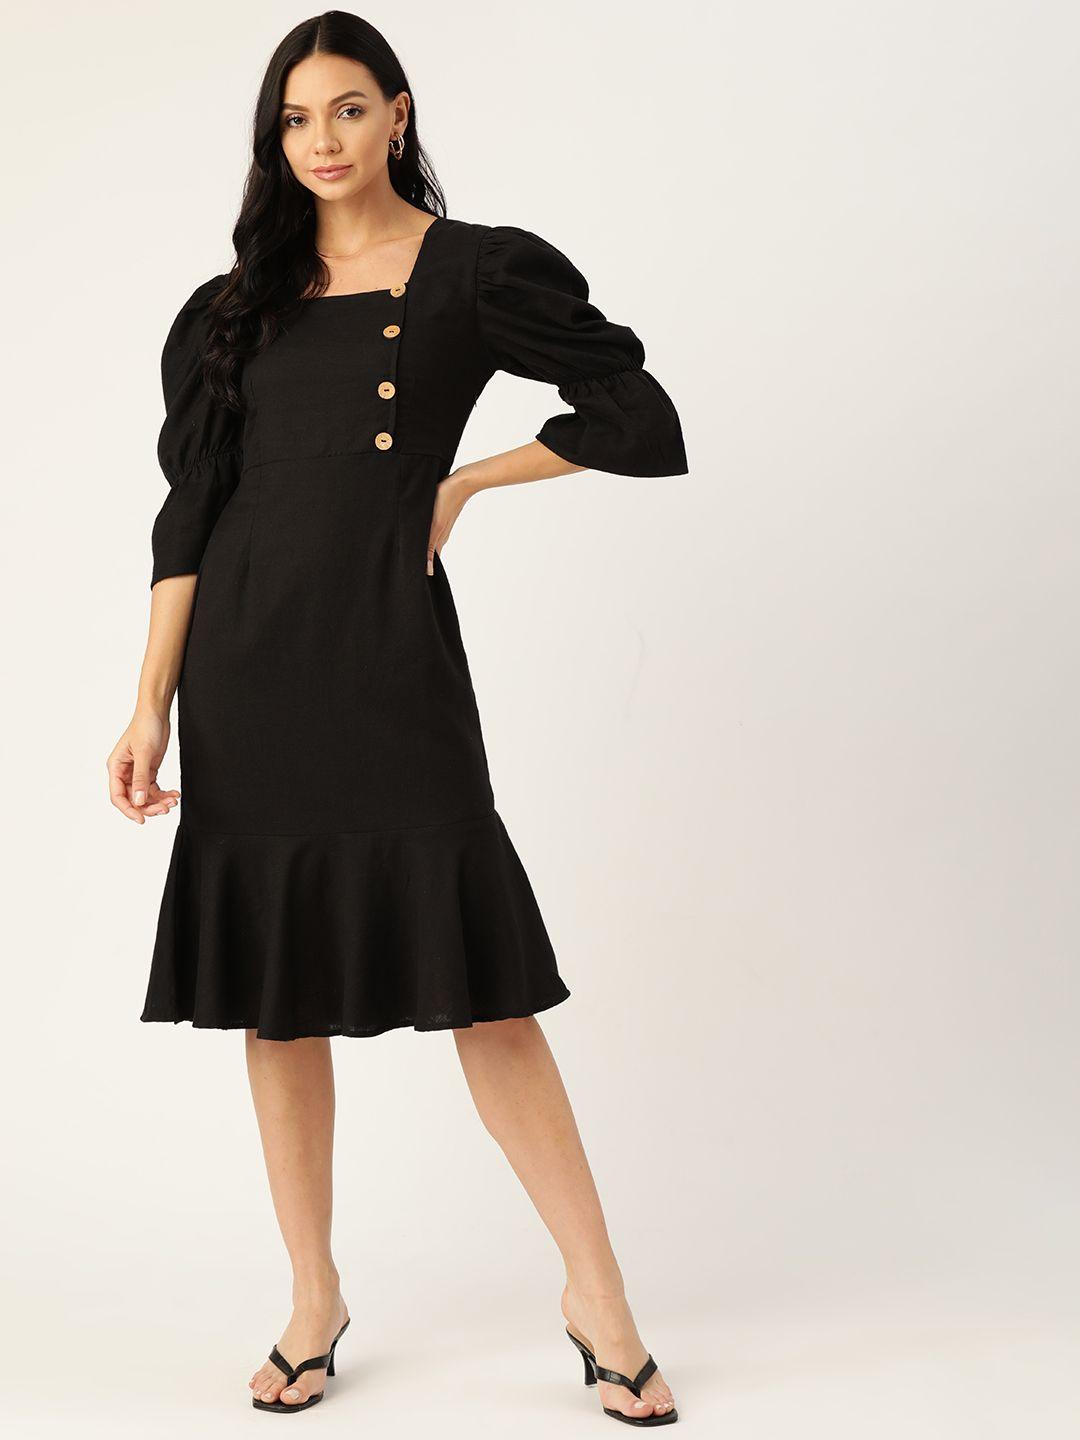 off label black solid a-line dress with ruffled hem